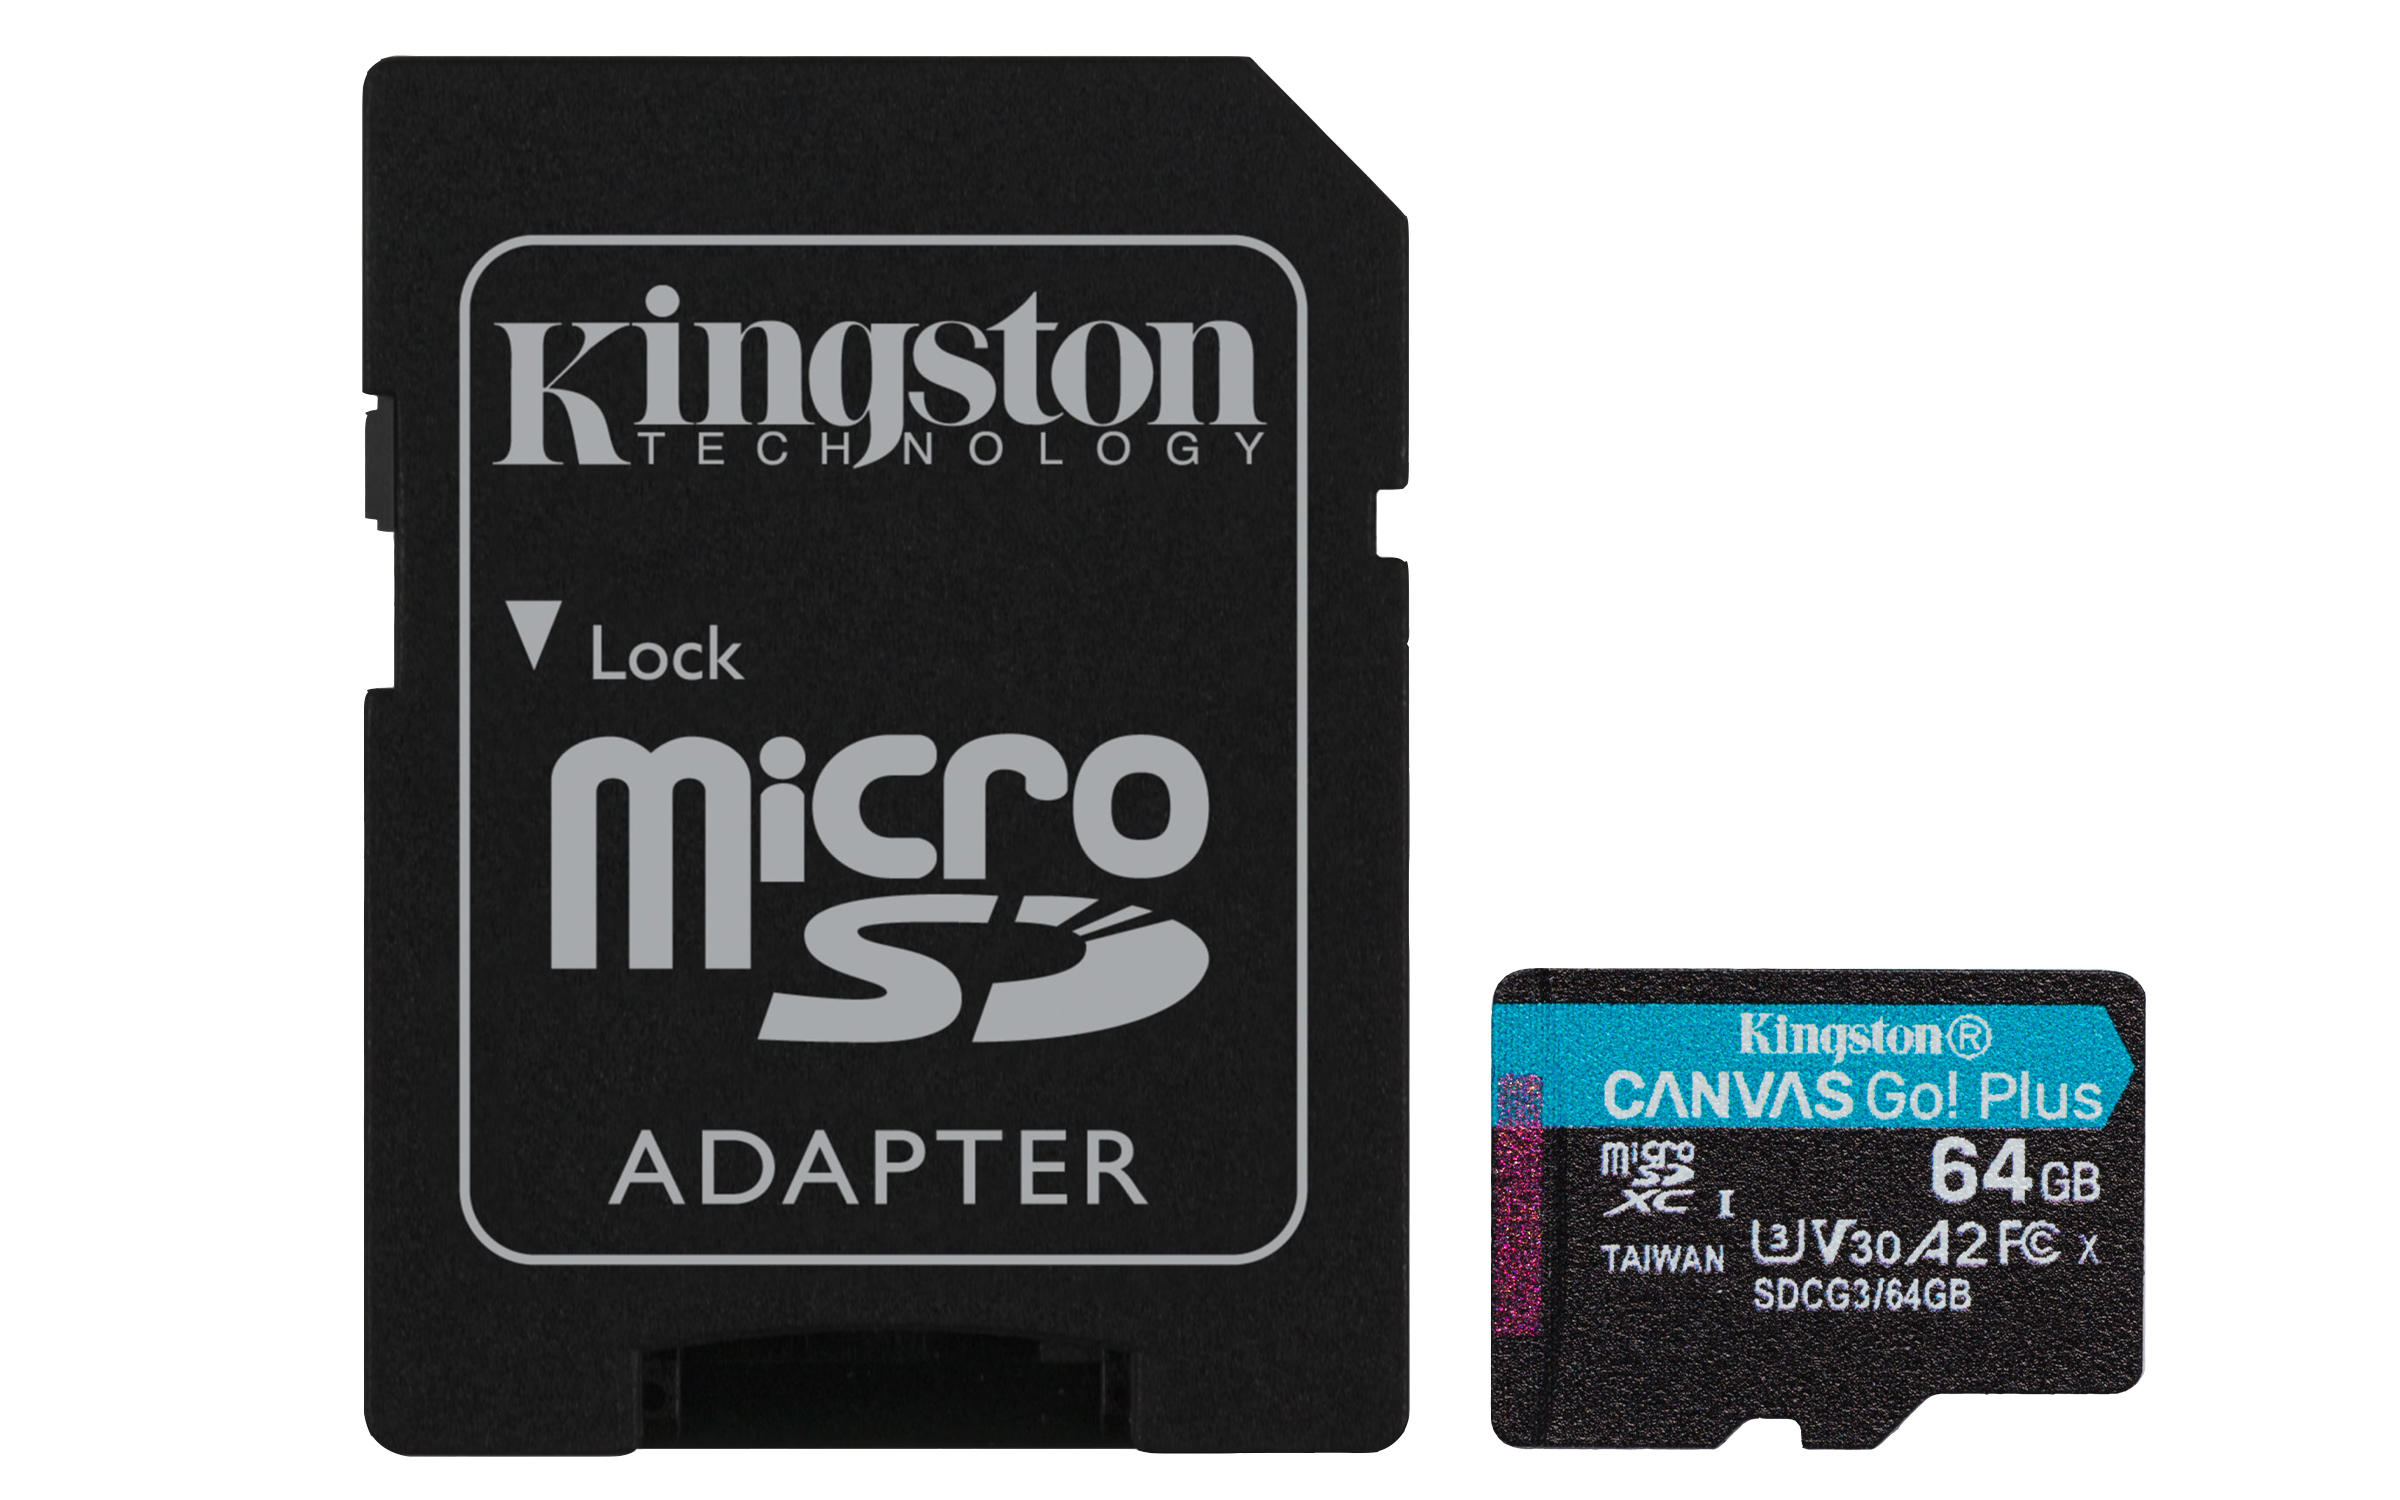 Kingston 64GB Canvas Go Plus UHS-I microSDXC Memory Card with SD Adapter